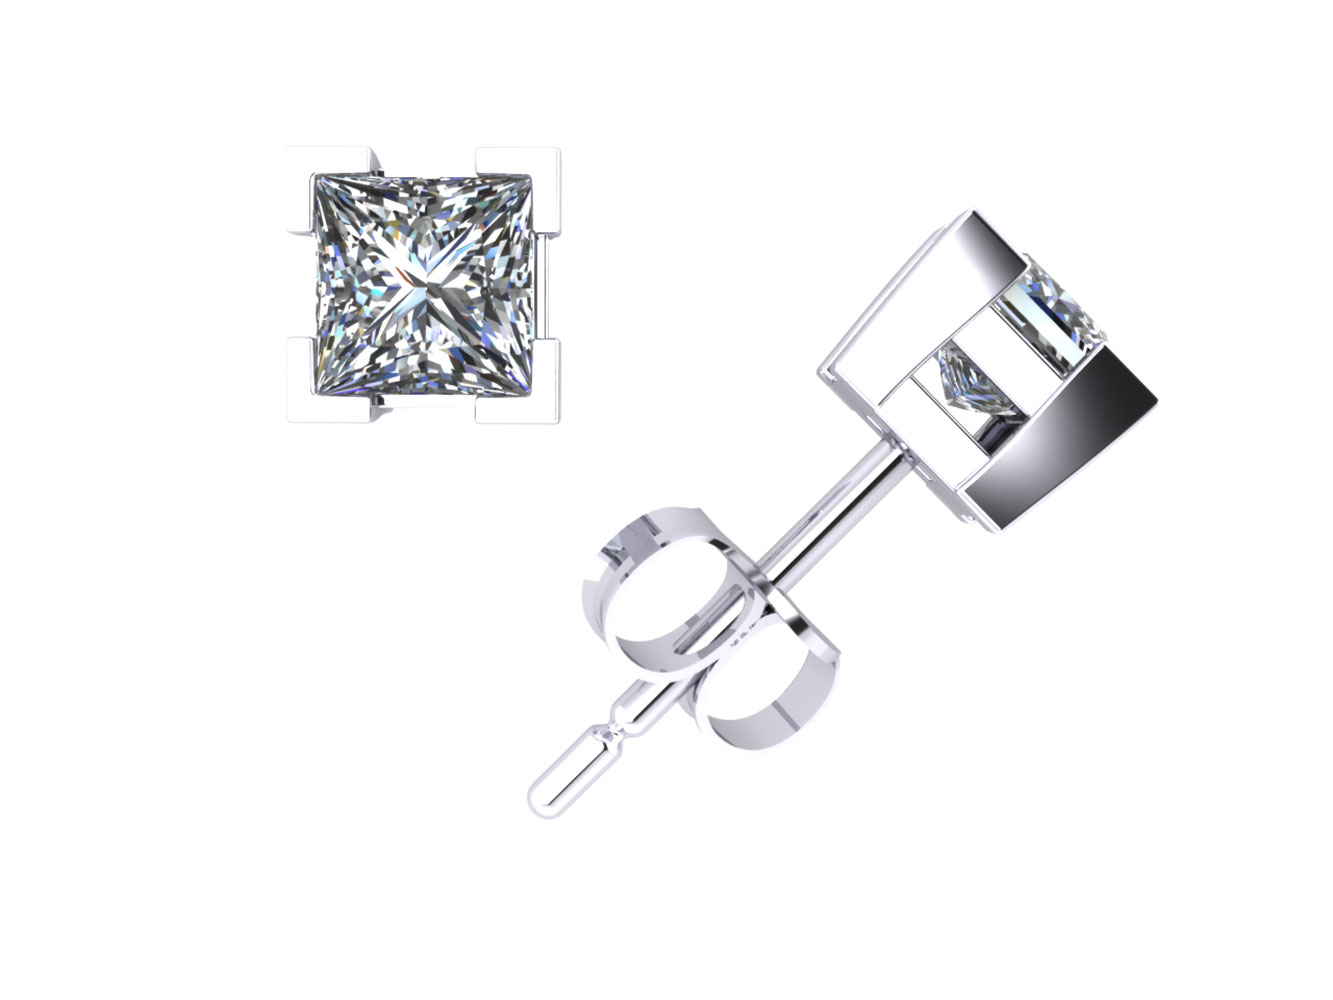 Jewel We Sell 0.4Carat Princess Cut Diamond Solitaire Stud Earrings 14Karat White or Yellow Gold V-Prong G SI1